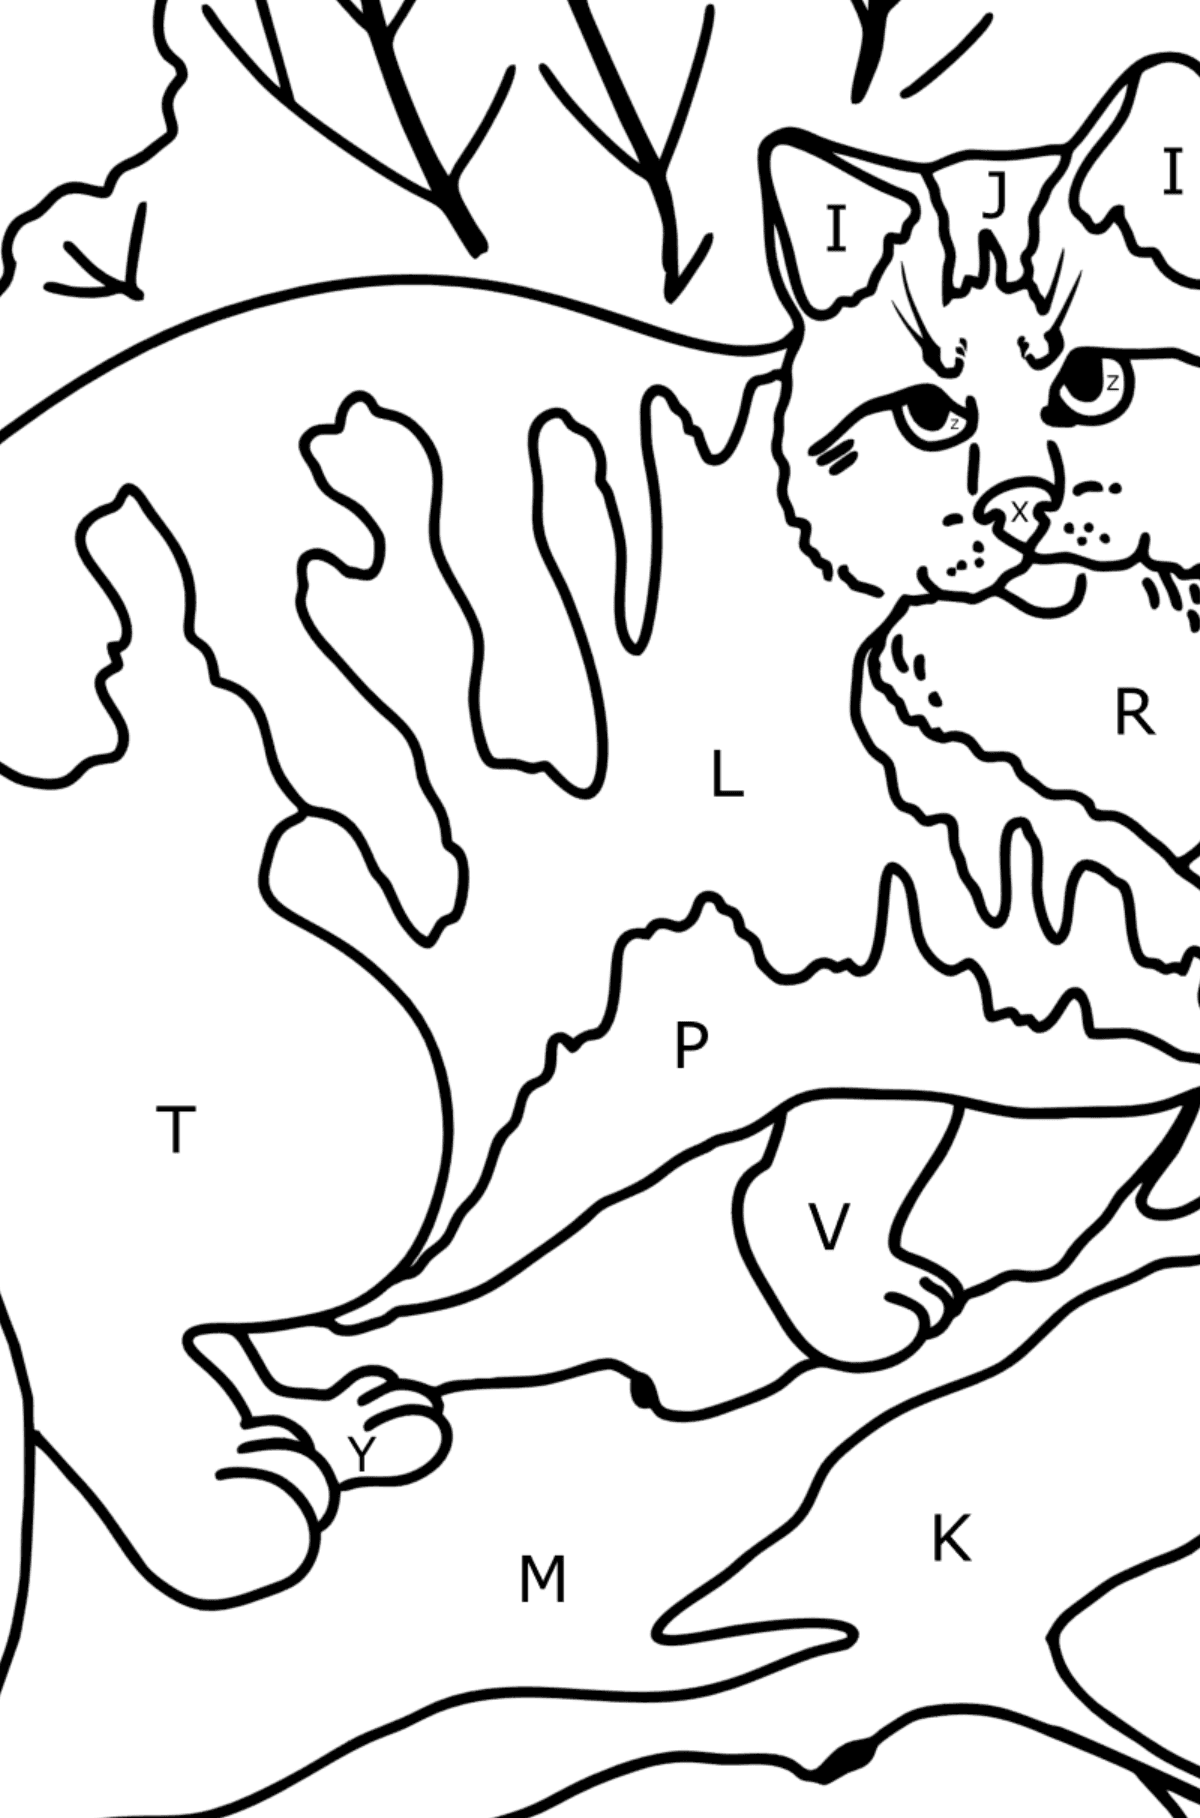 Wild Forest Cat coloring page - Coloring by Letters for Kids